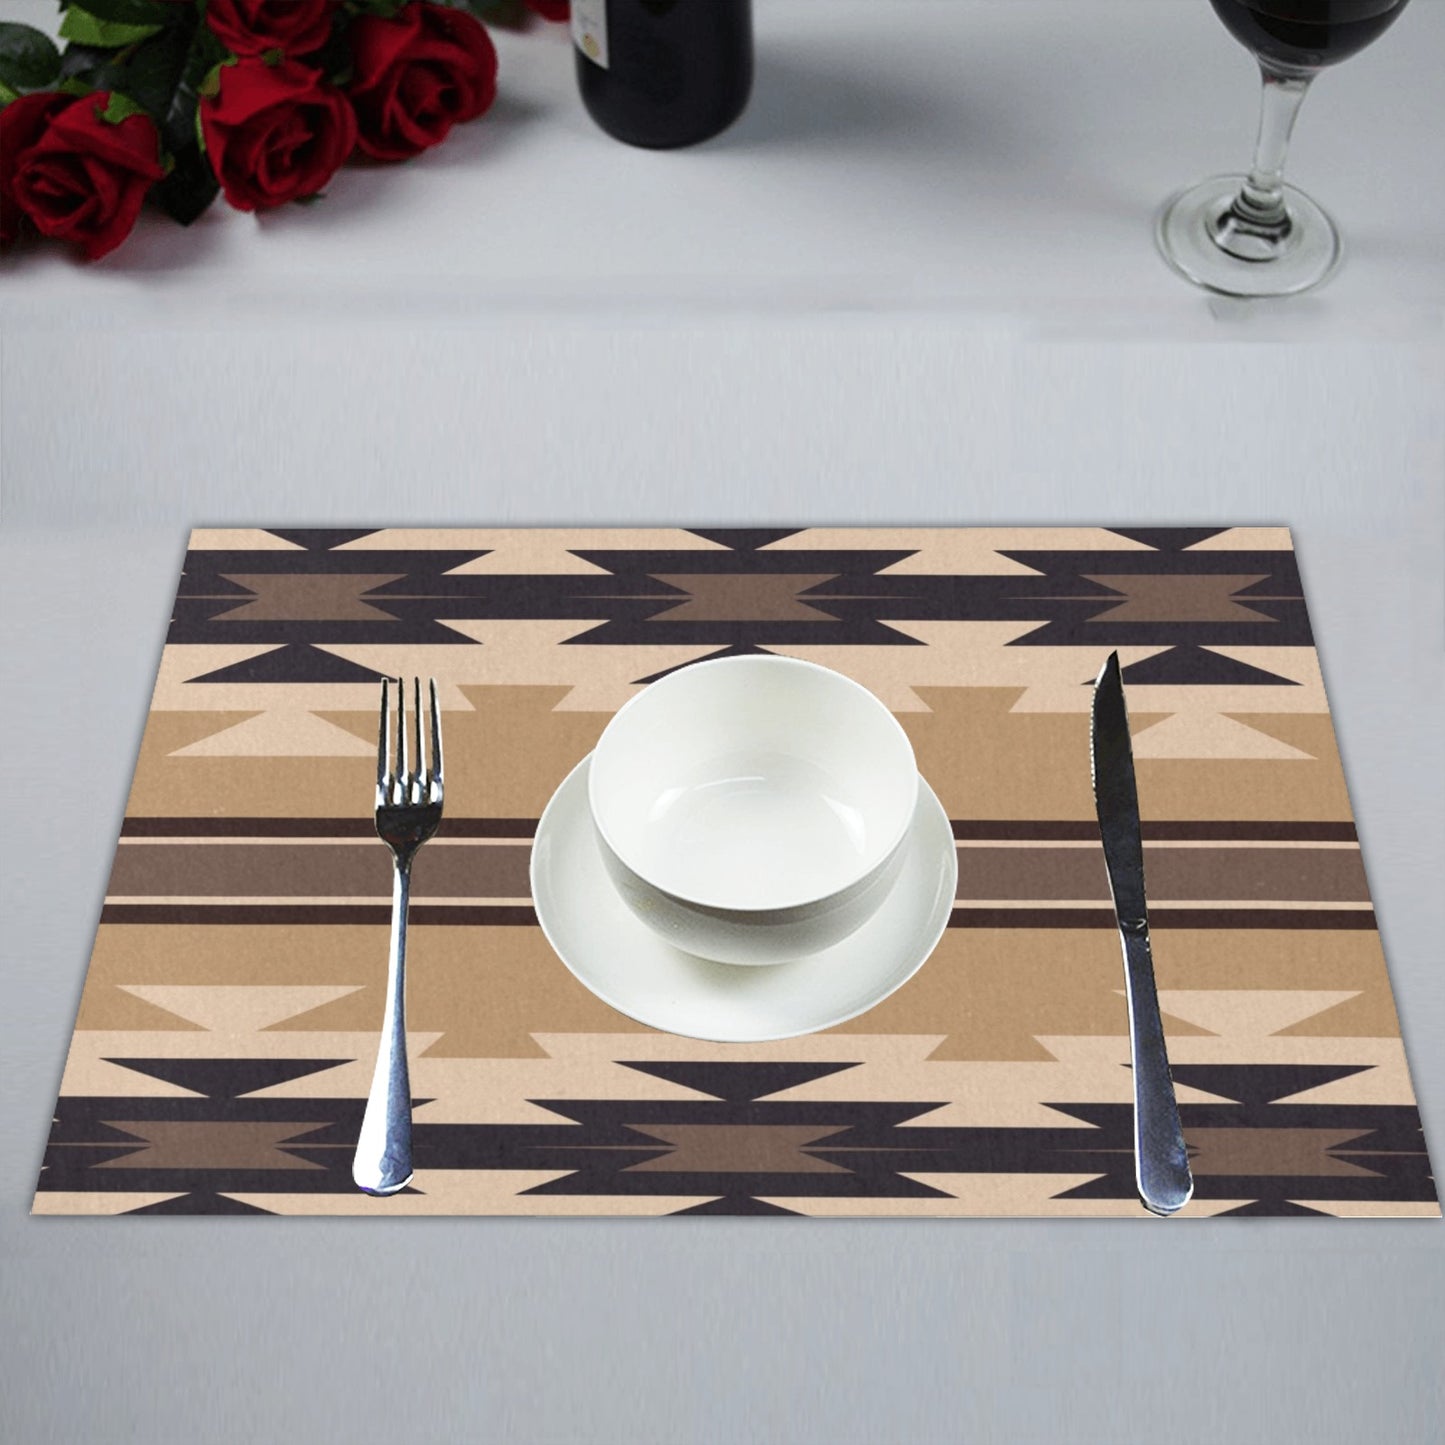 Set of 4 Earth Aztec Western Placemats 14" x 19"